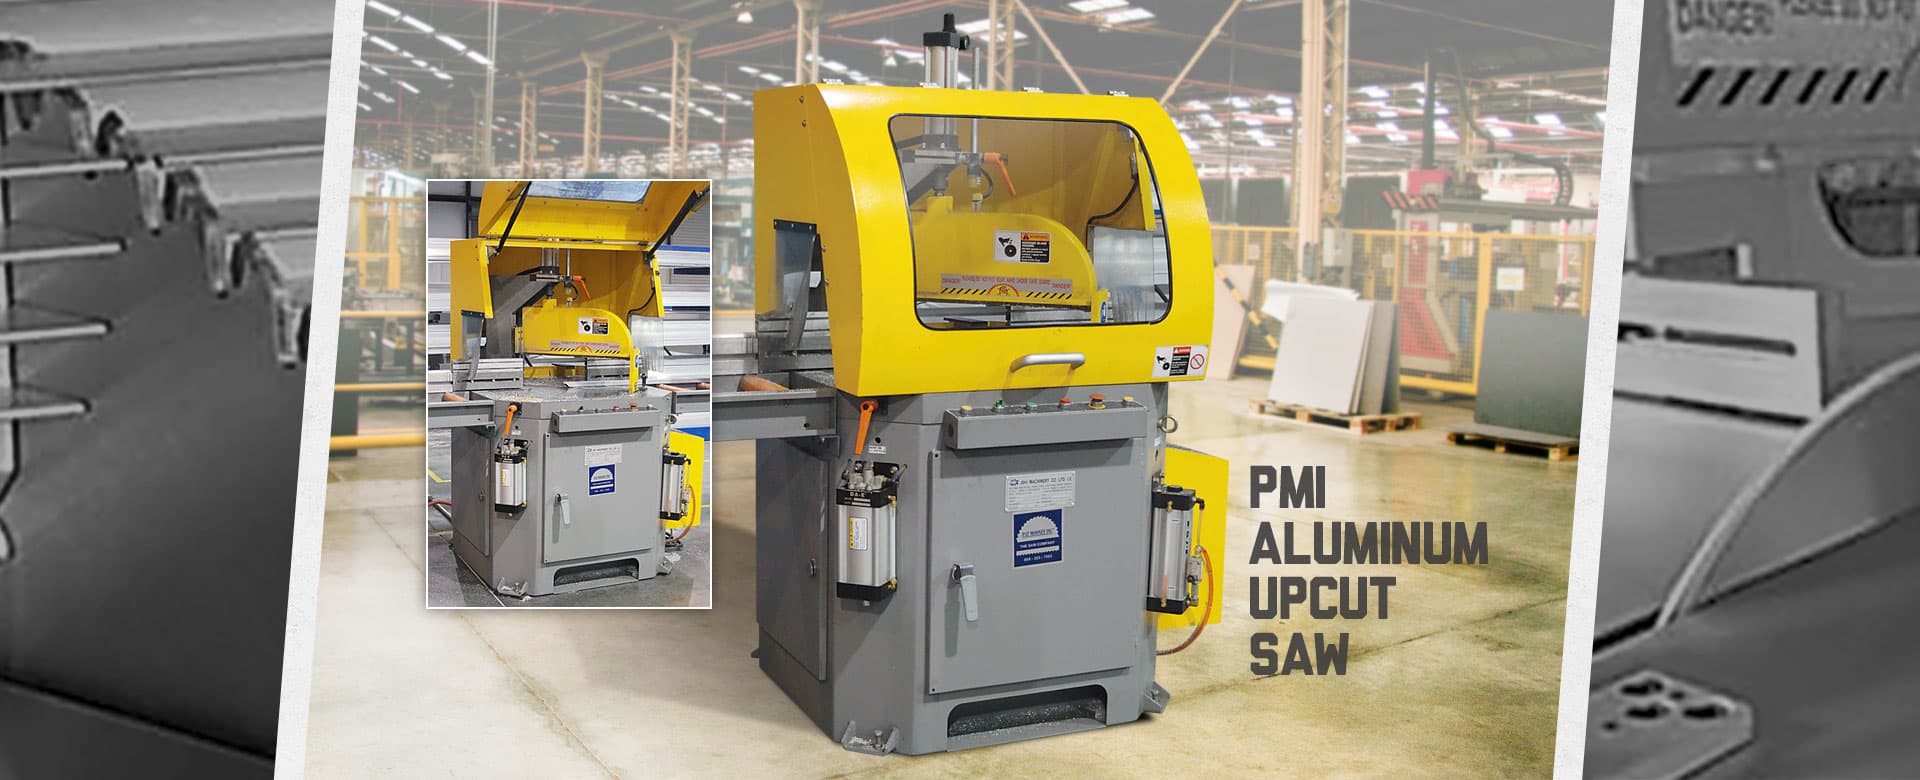 GSS Machinery offers PMI Aluminum Upcut Saws with auto or semi-auto feed systems